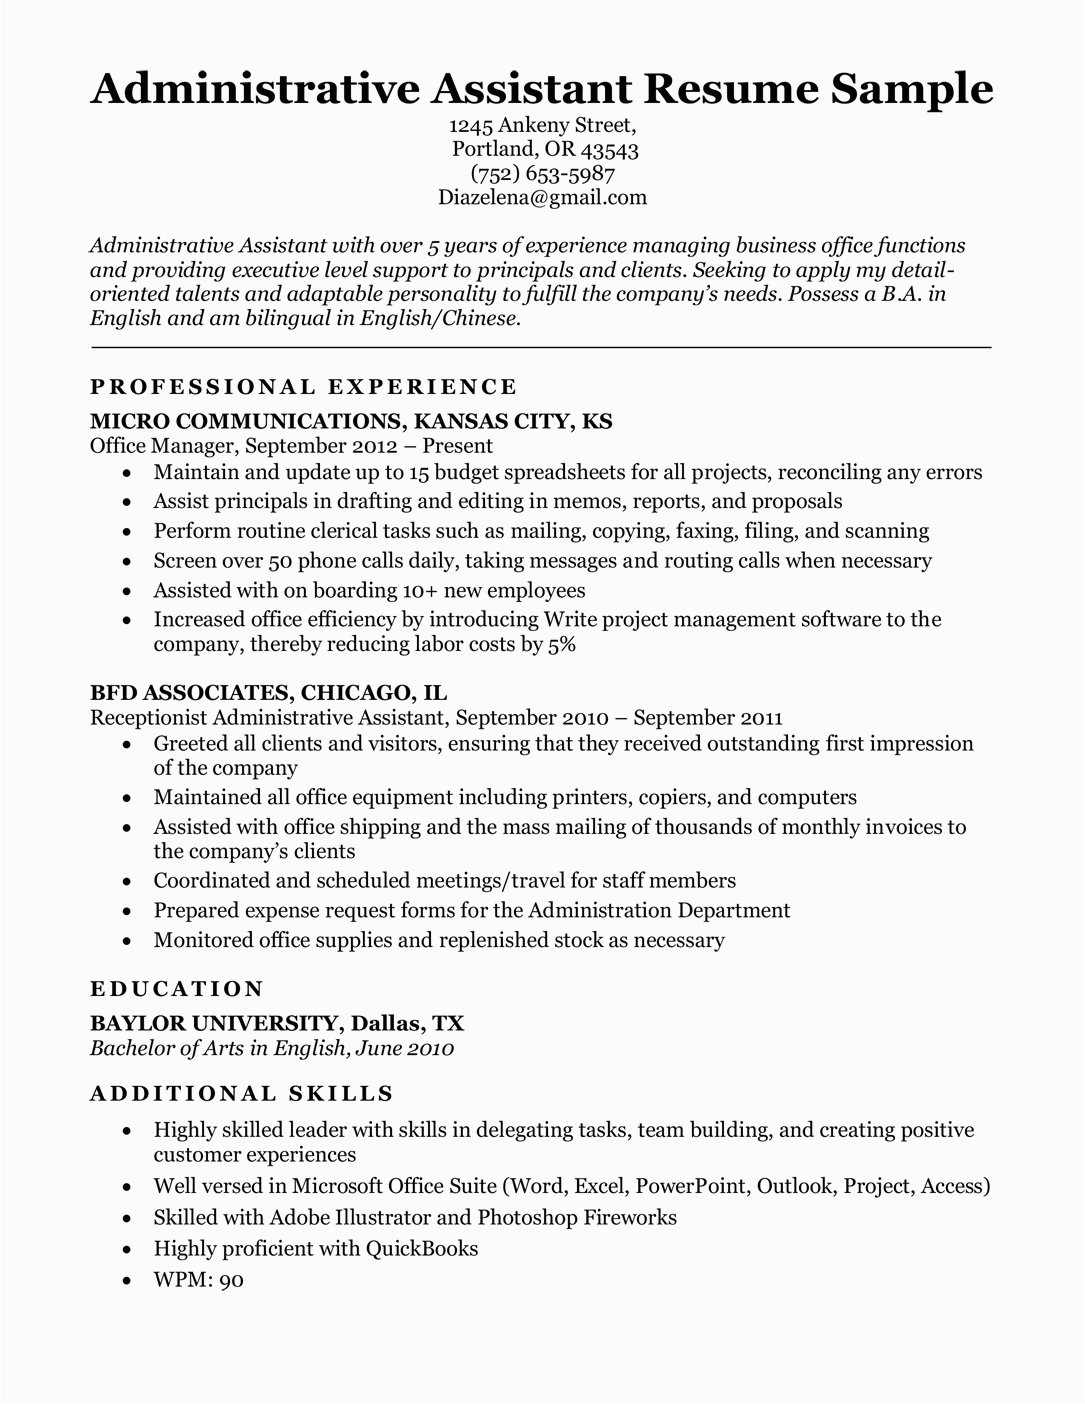 Sample Resumes for Administrative assistant Positions Administrative assistant Resume Example